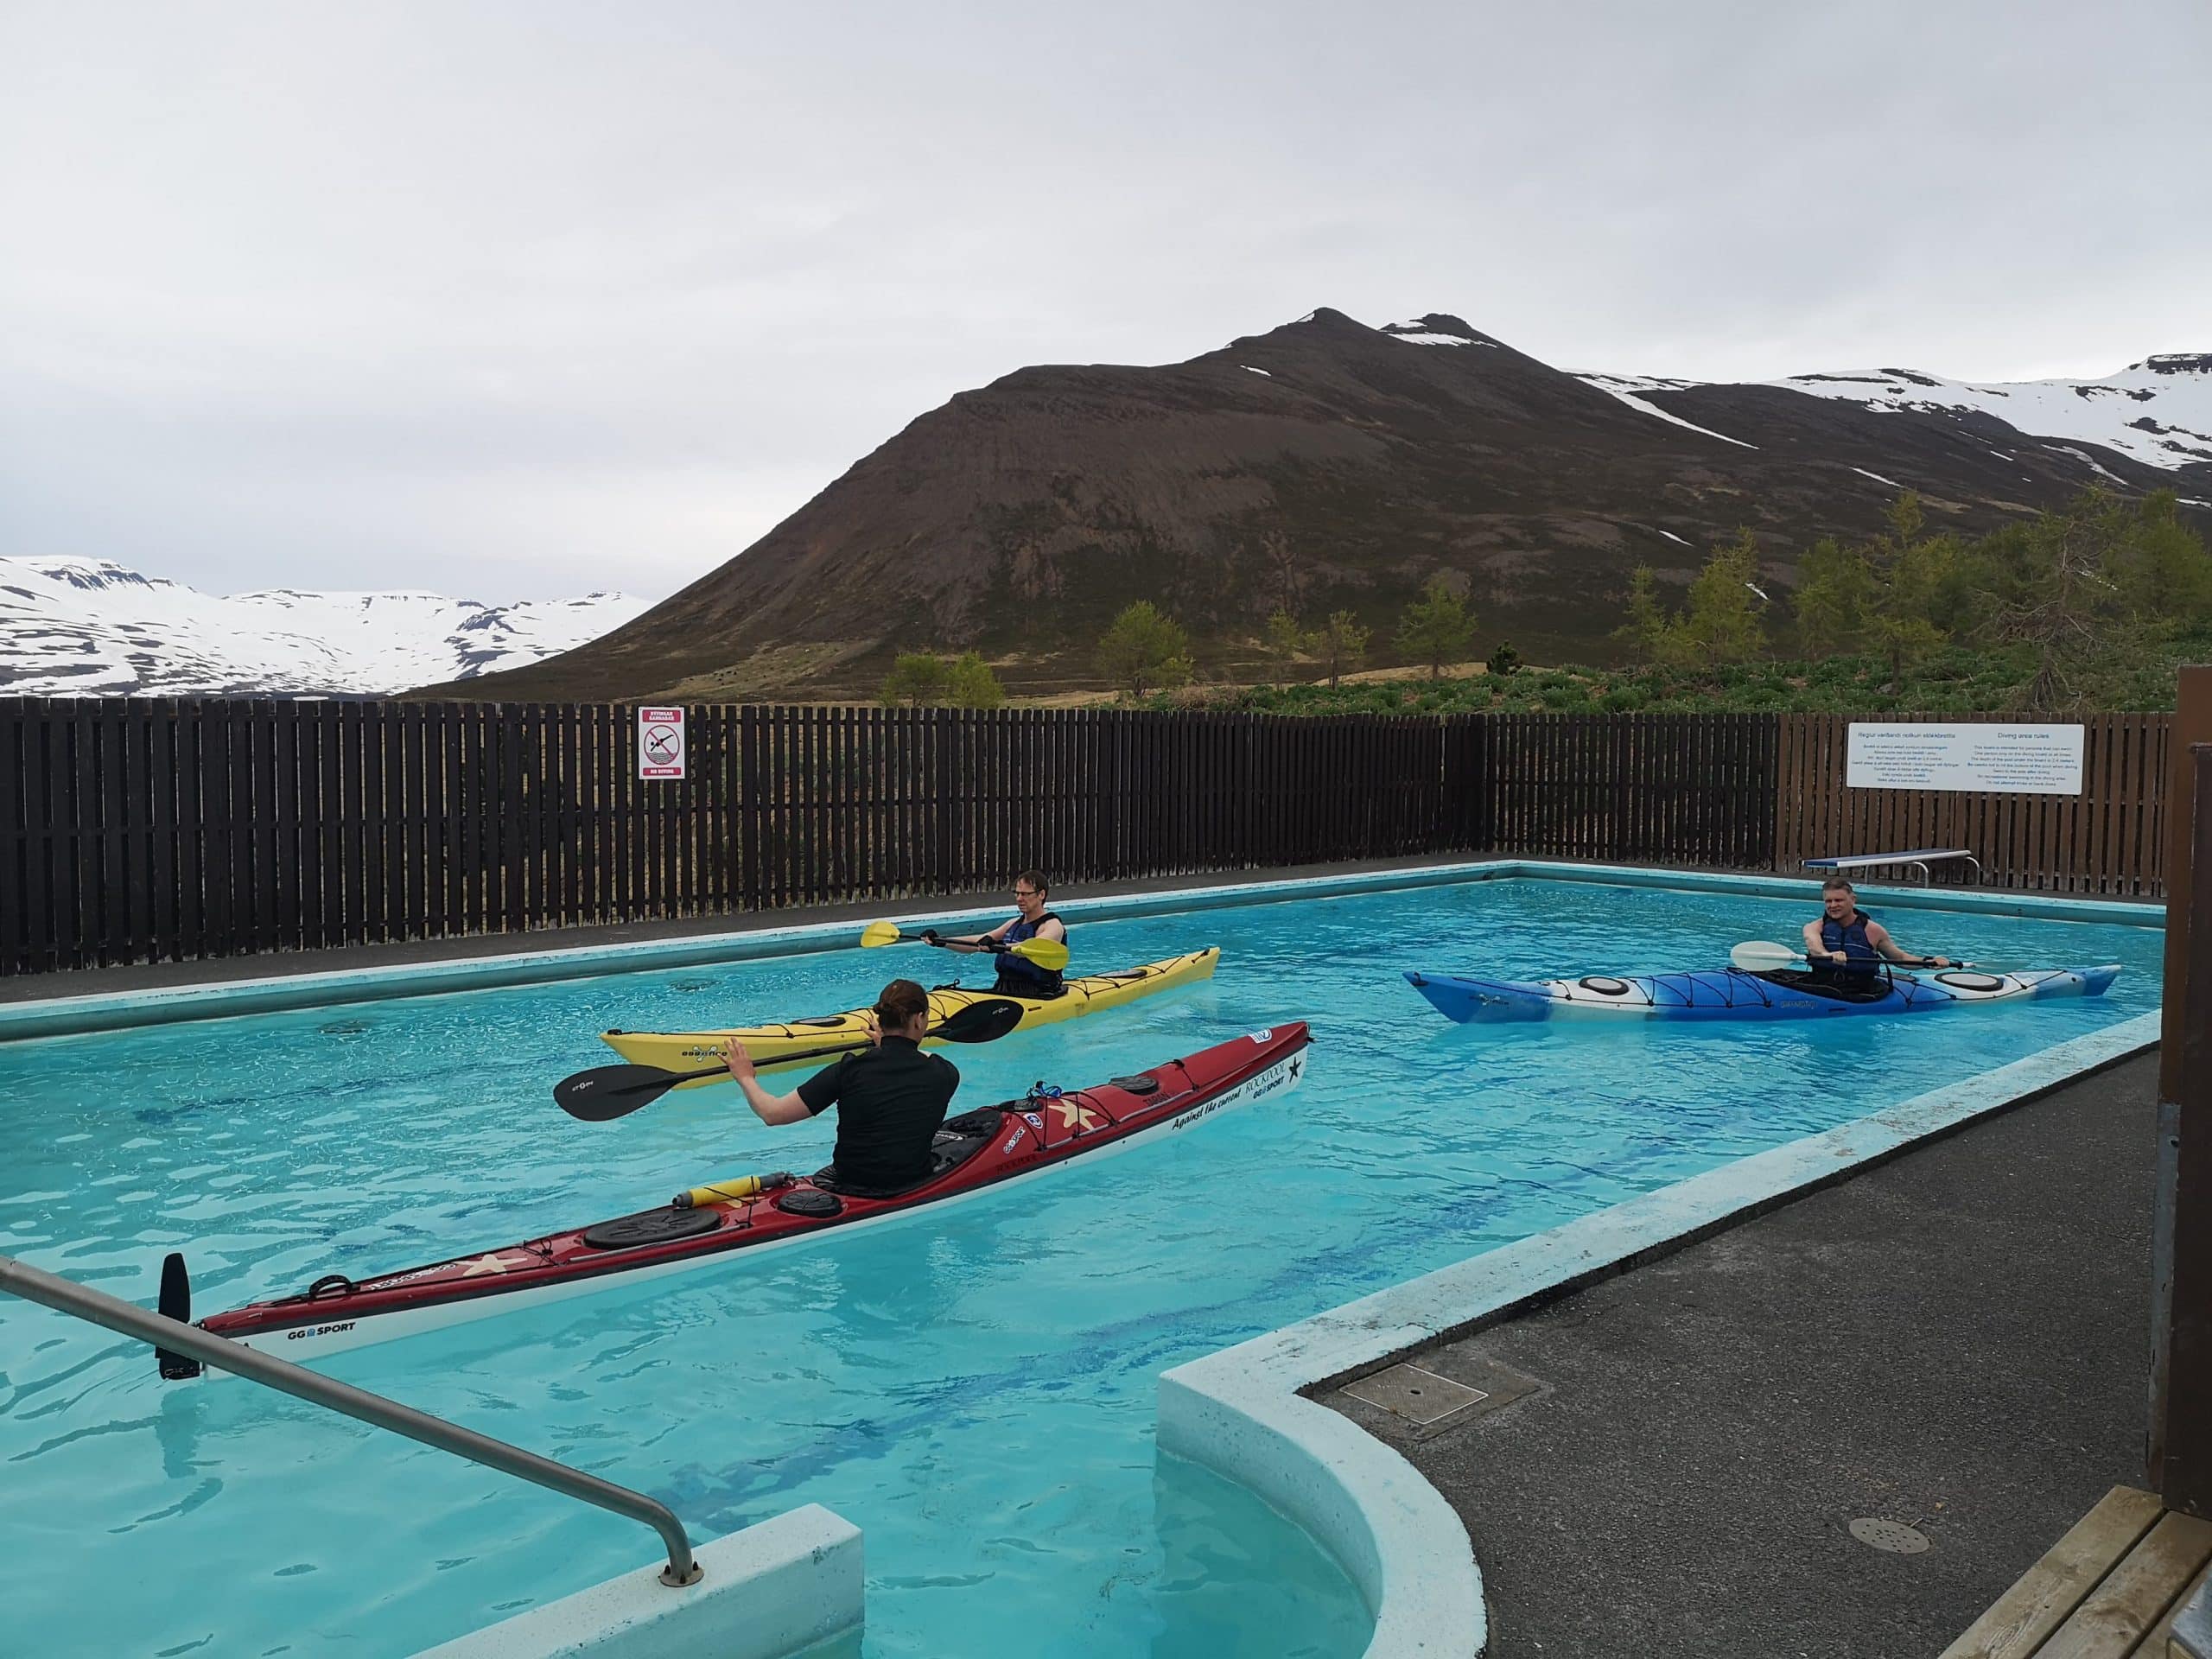 Three people in kayaks in a pool, North Iceland's mountains in the background.